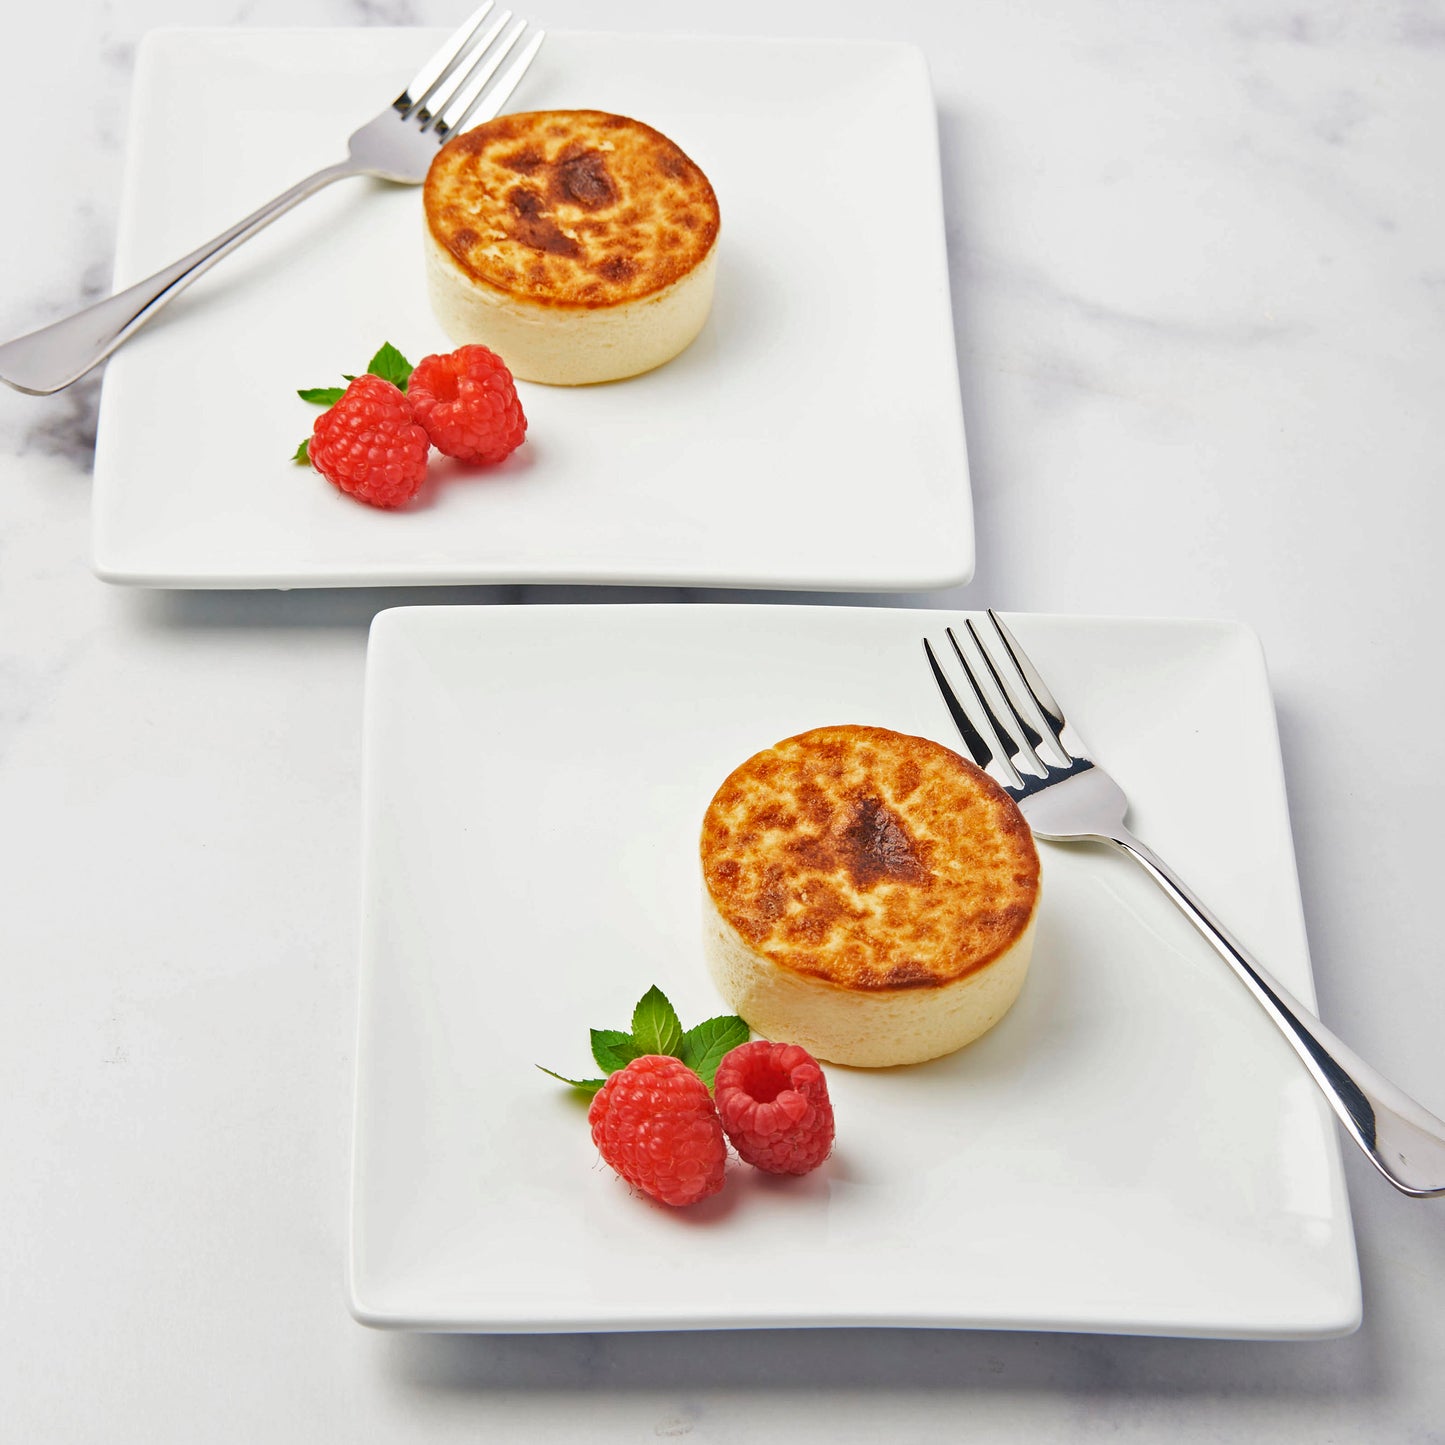 2 Crème Brulee Cheesecakes on plates ready to be eaten